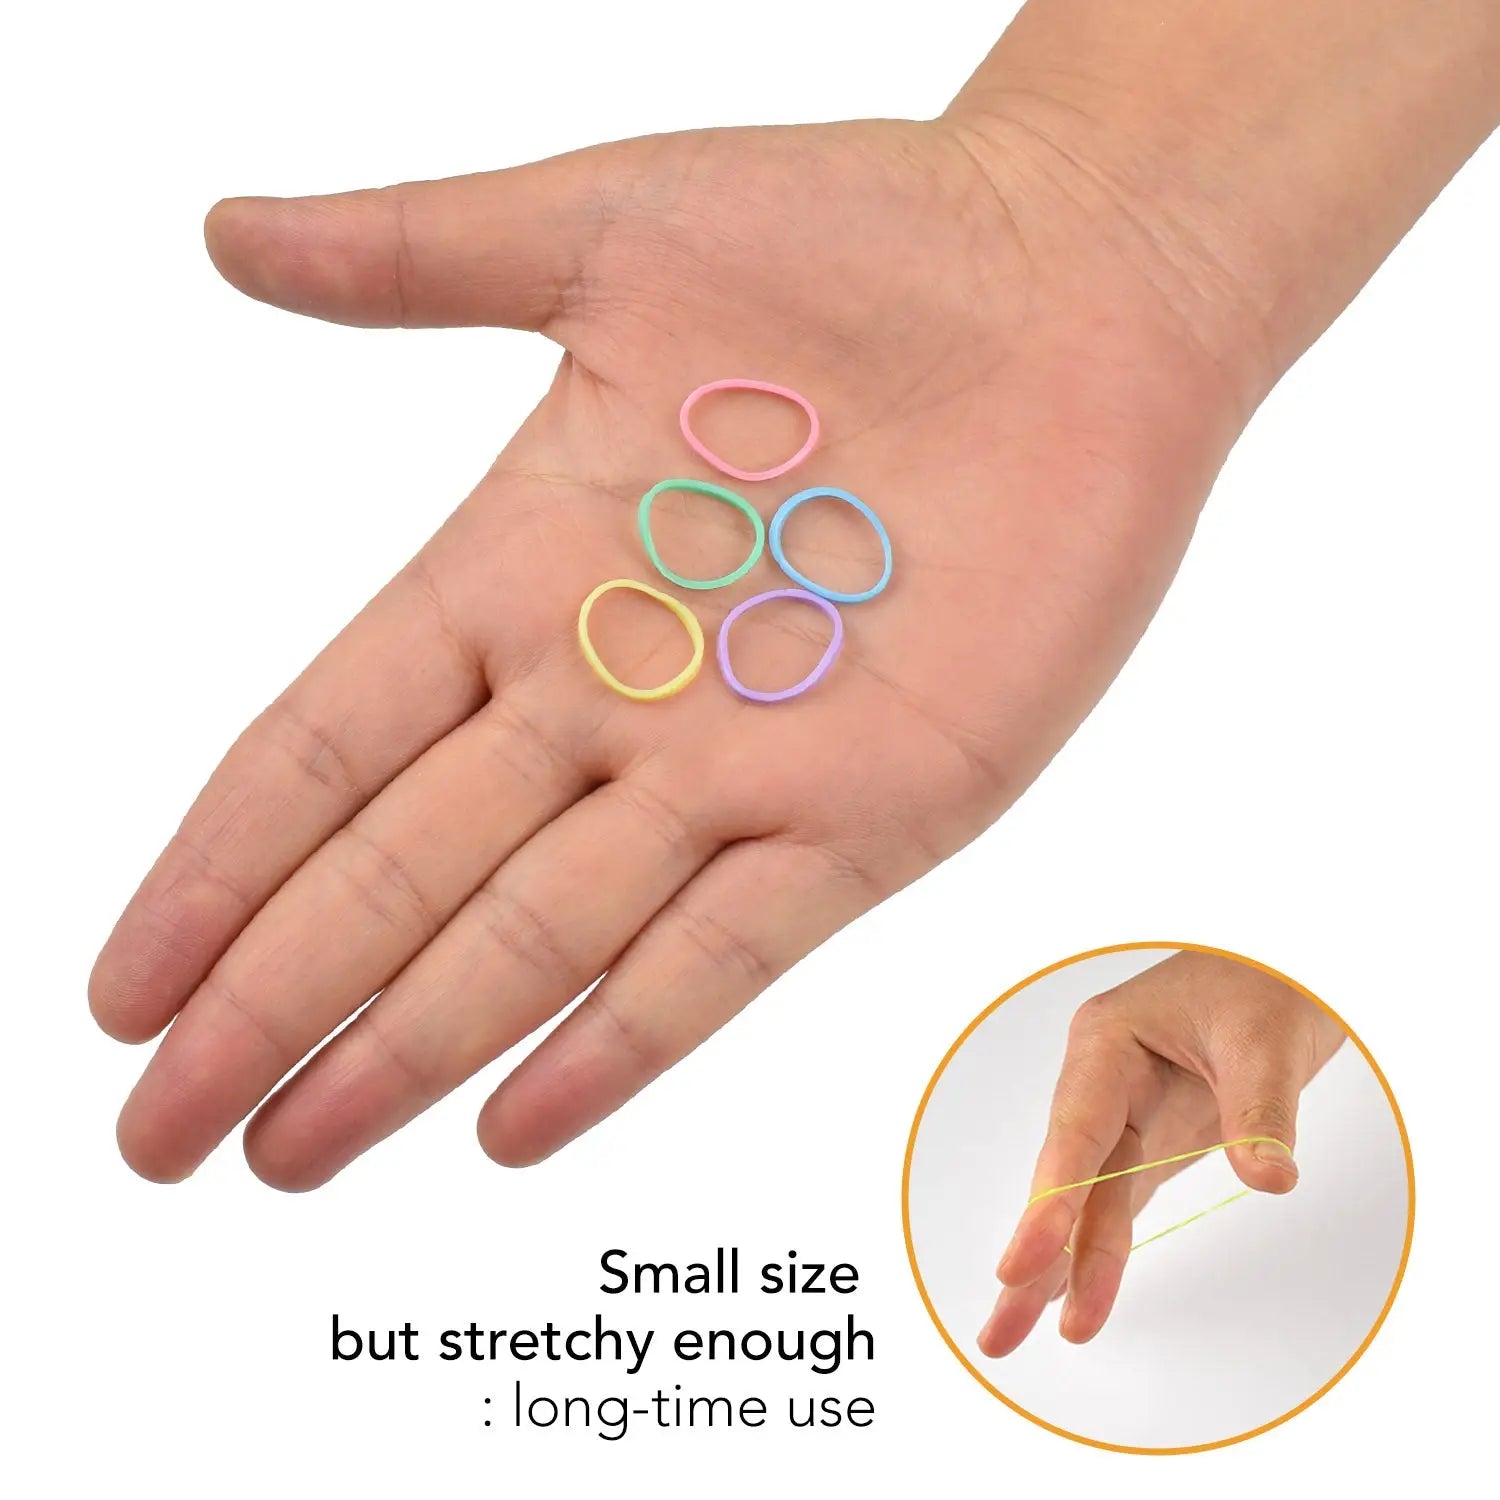 Extra Strong Mini Rubber Bands - Versatile Hair Styling Option with Ring on Hand